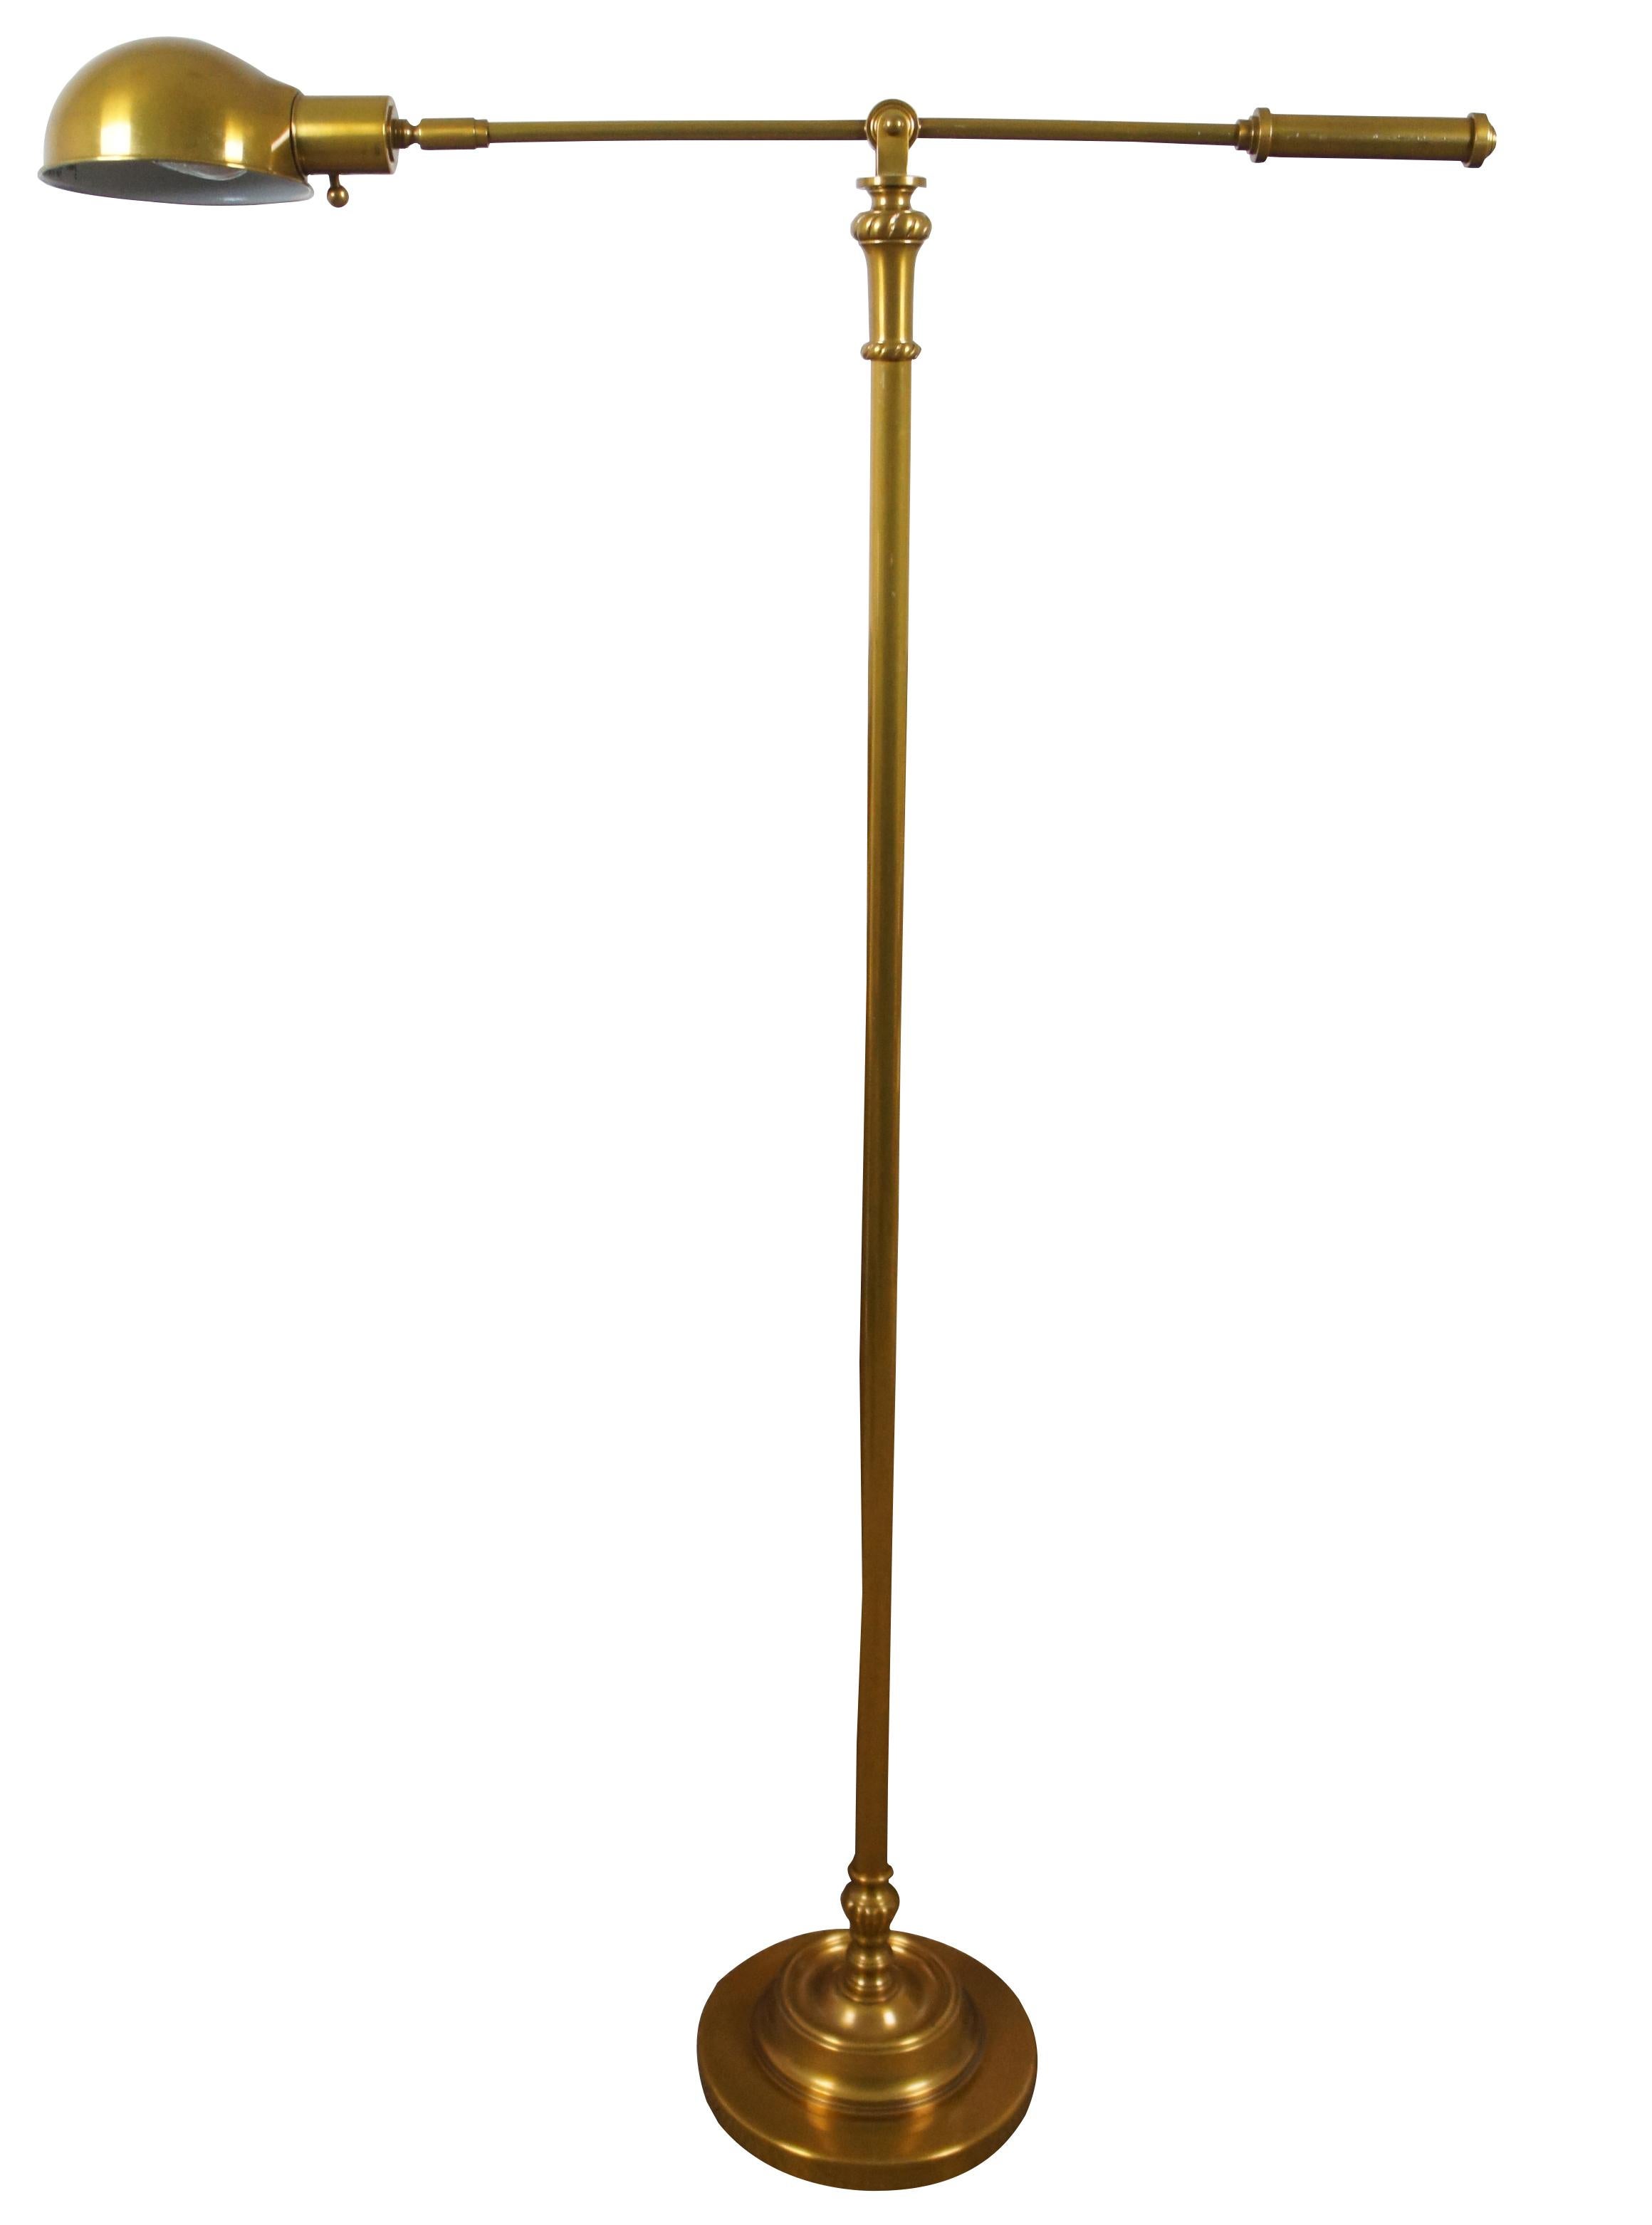 Mid century brass reading lamp with swivel arm.

Measures: 10” x 53.75” to 67” / Arm - 33.5” x 6.5” (Diameter x Height/Length x Width).